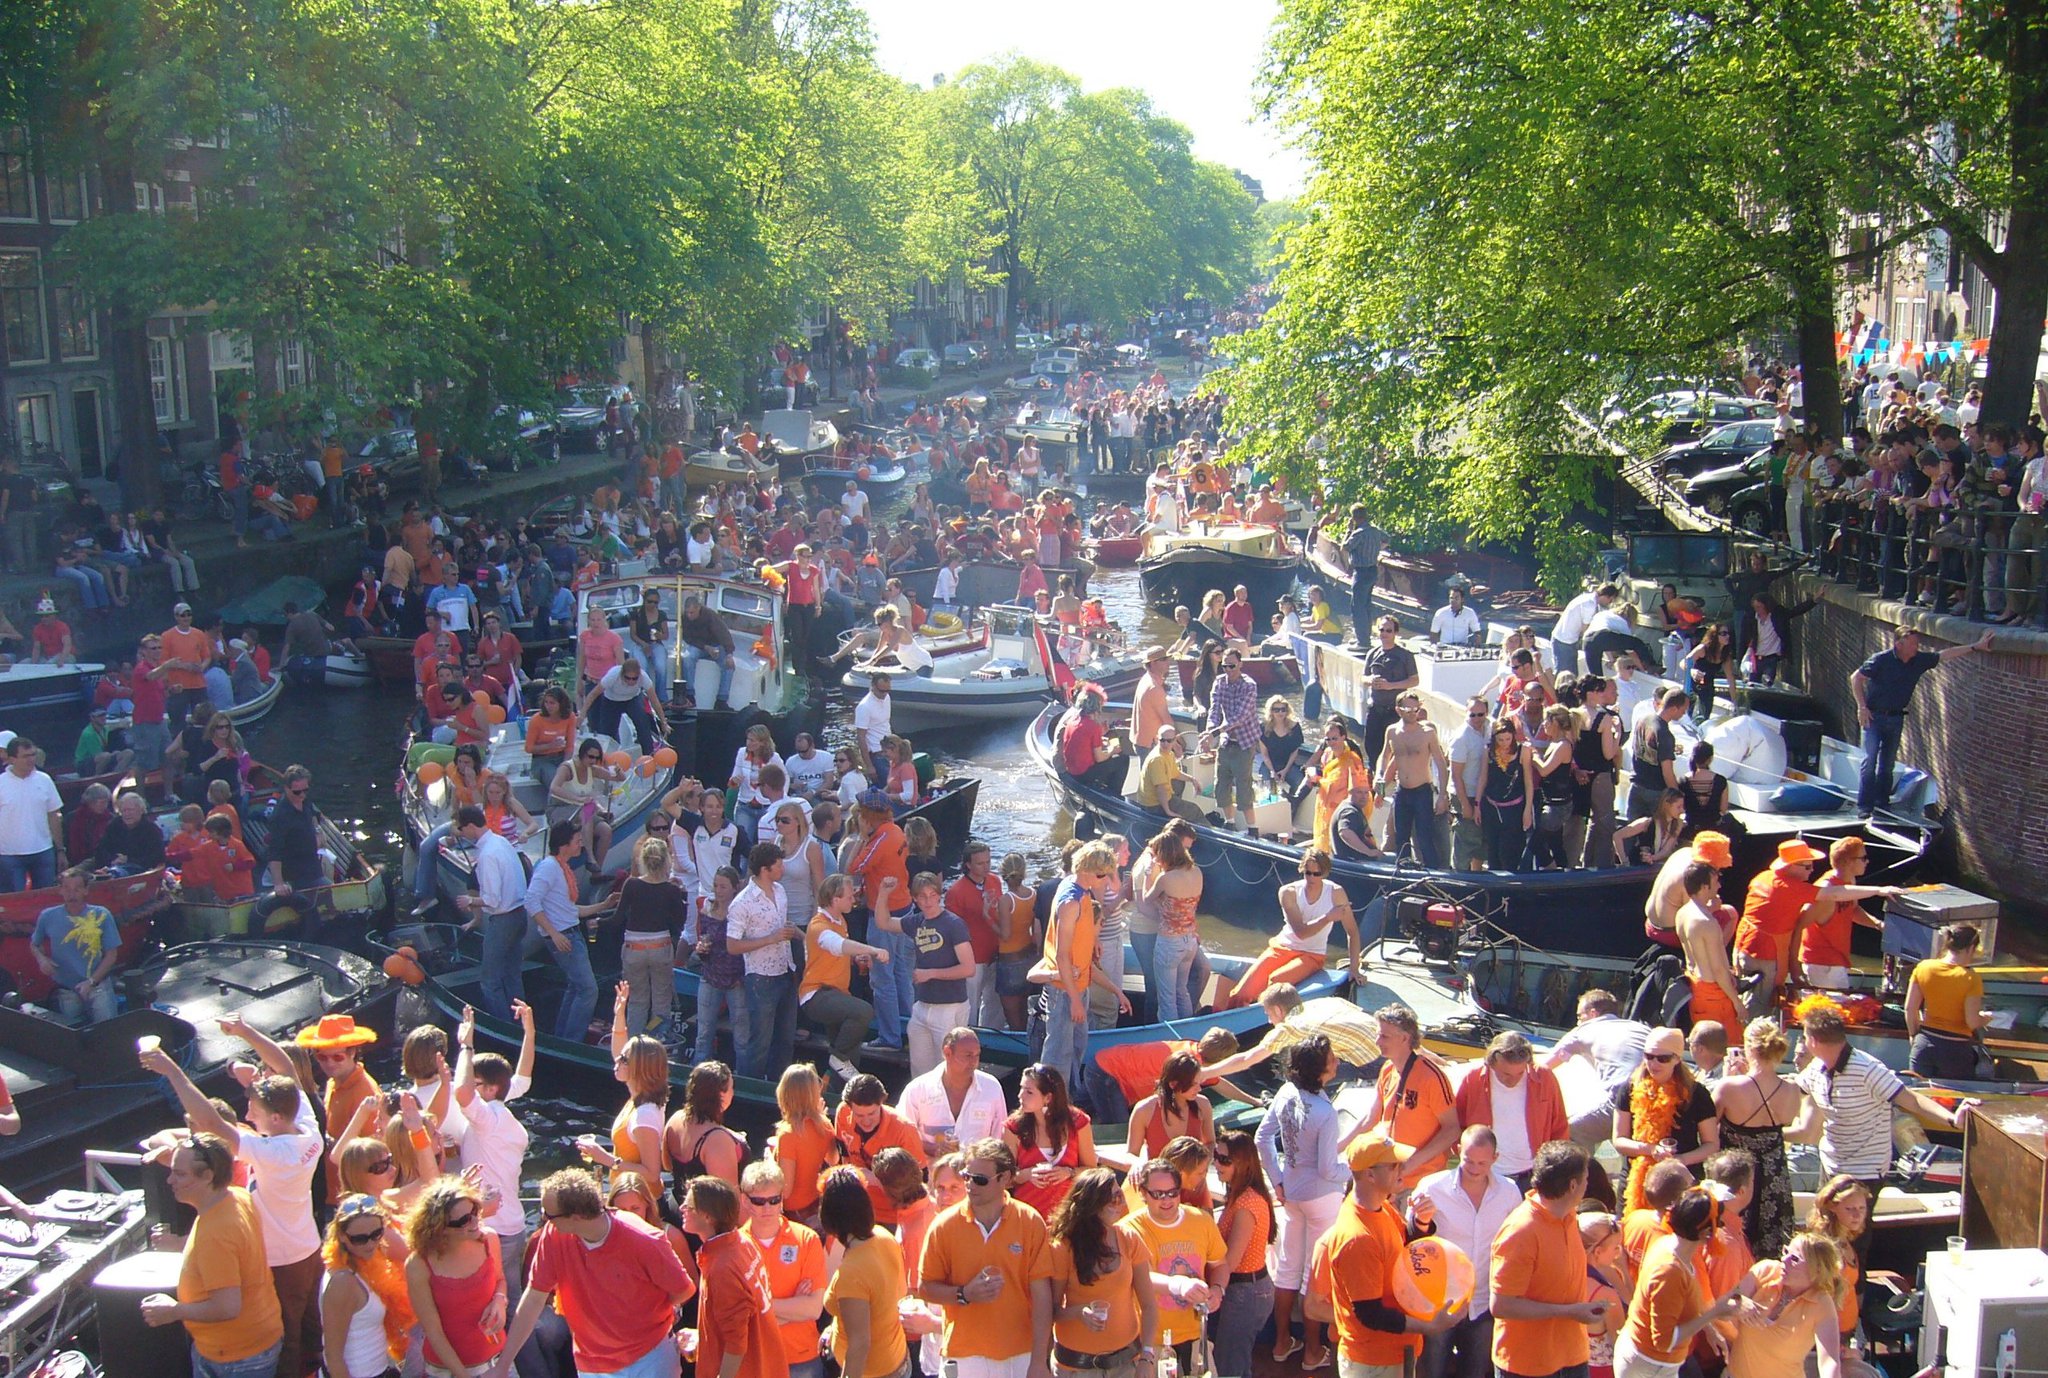 12-facts-about-koninginnedag-queens-day